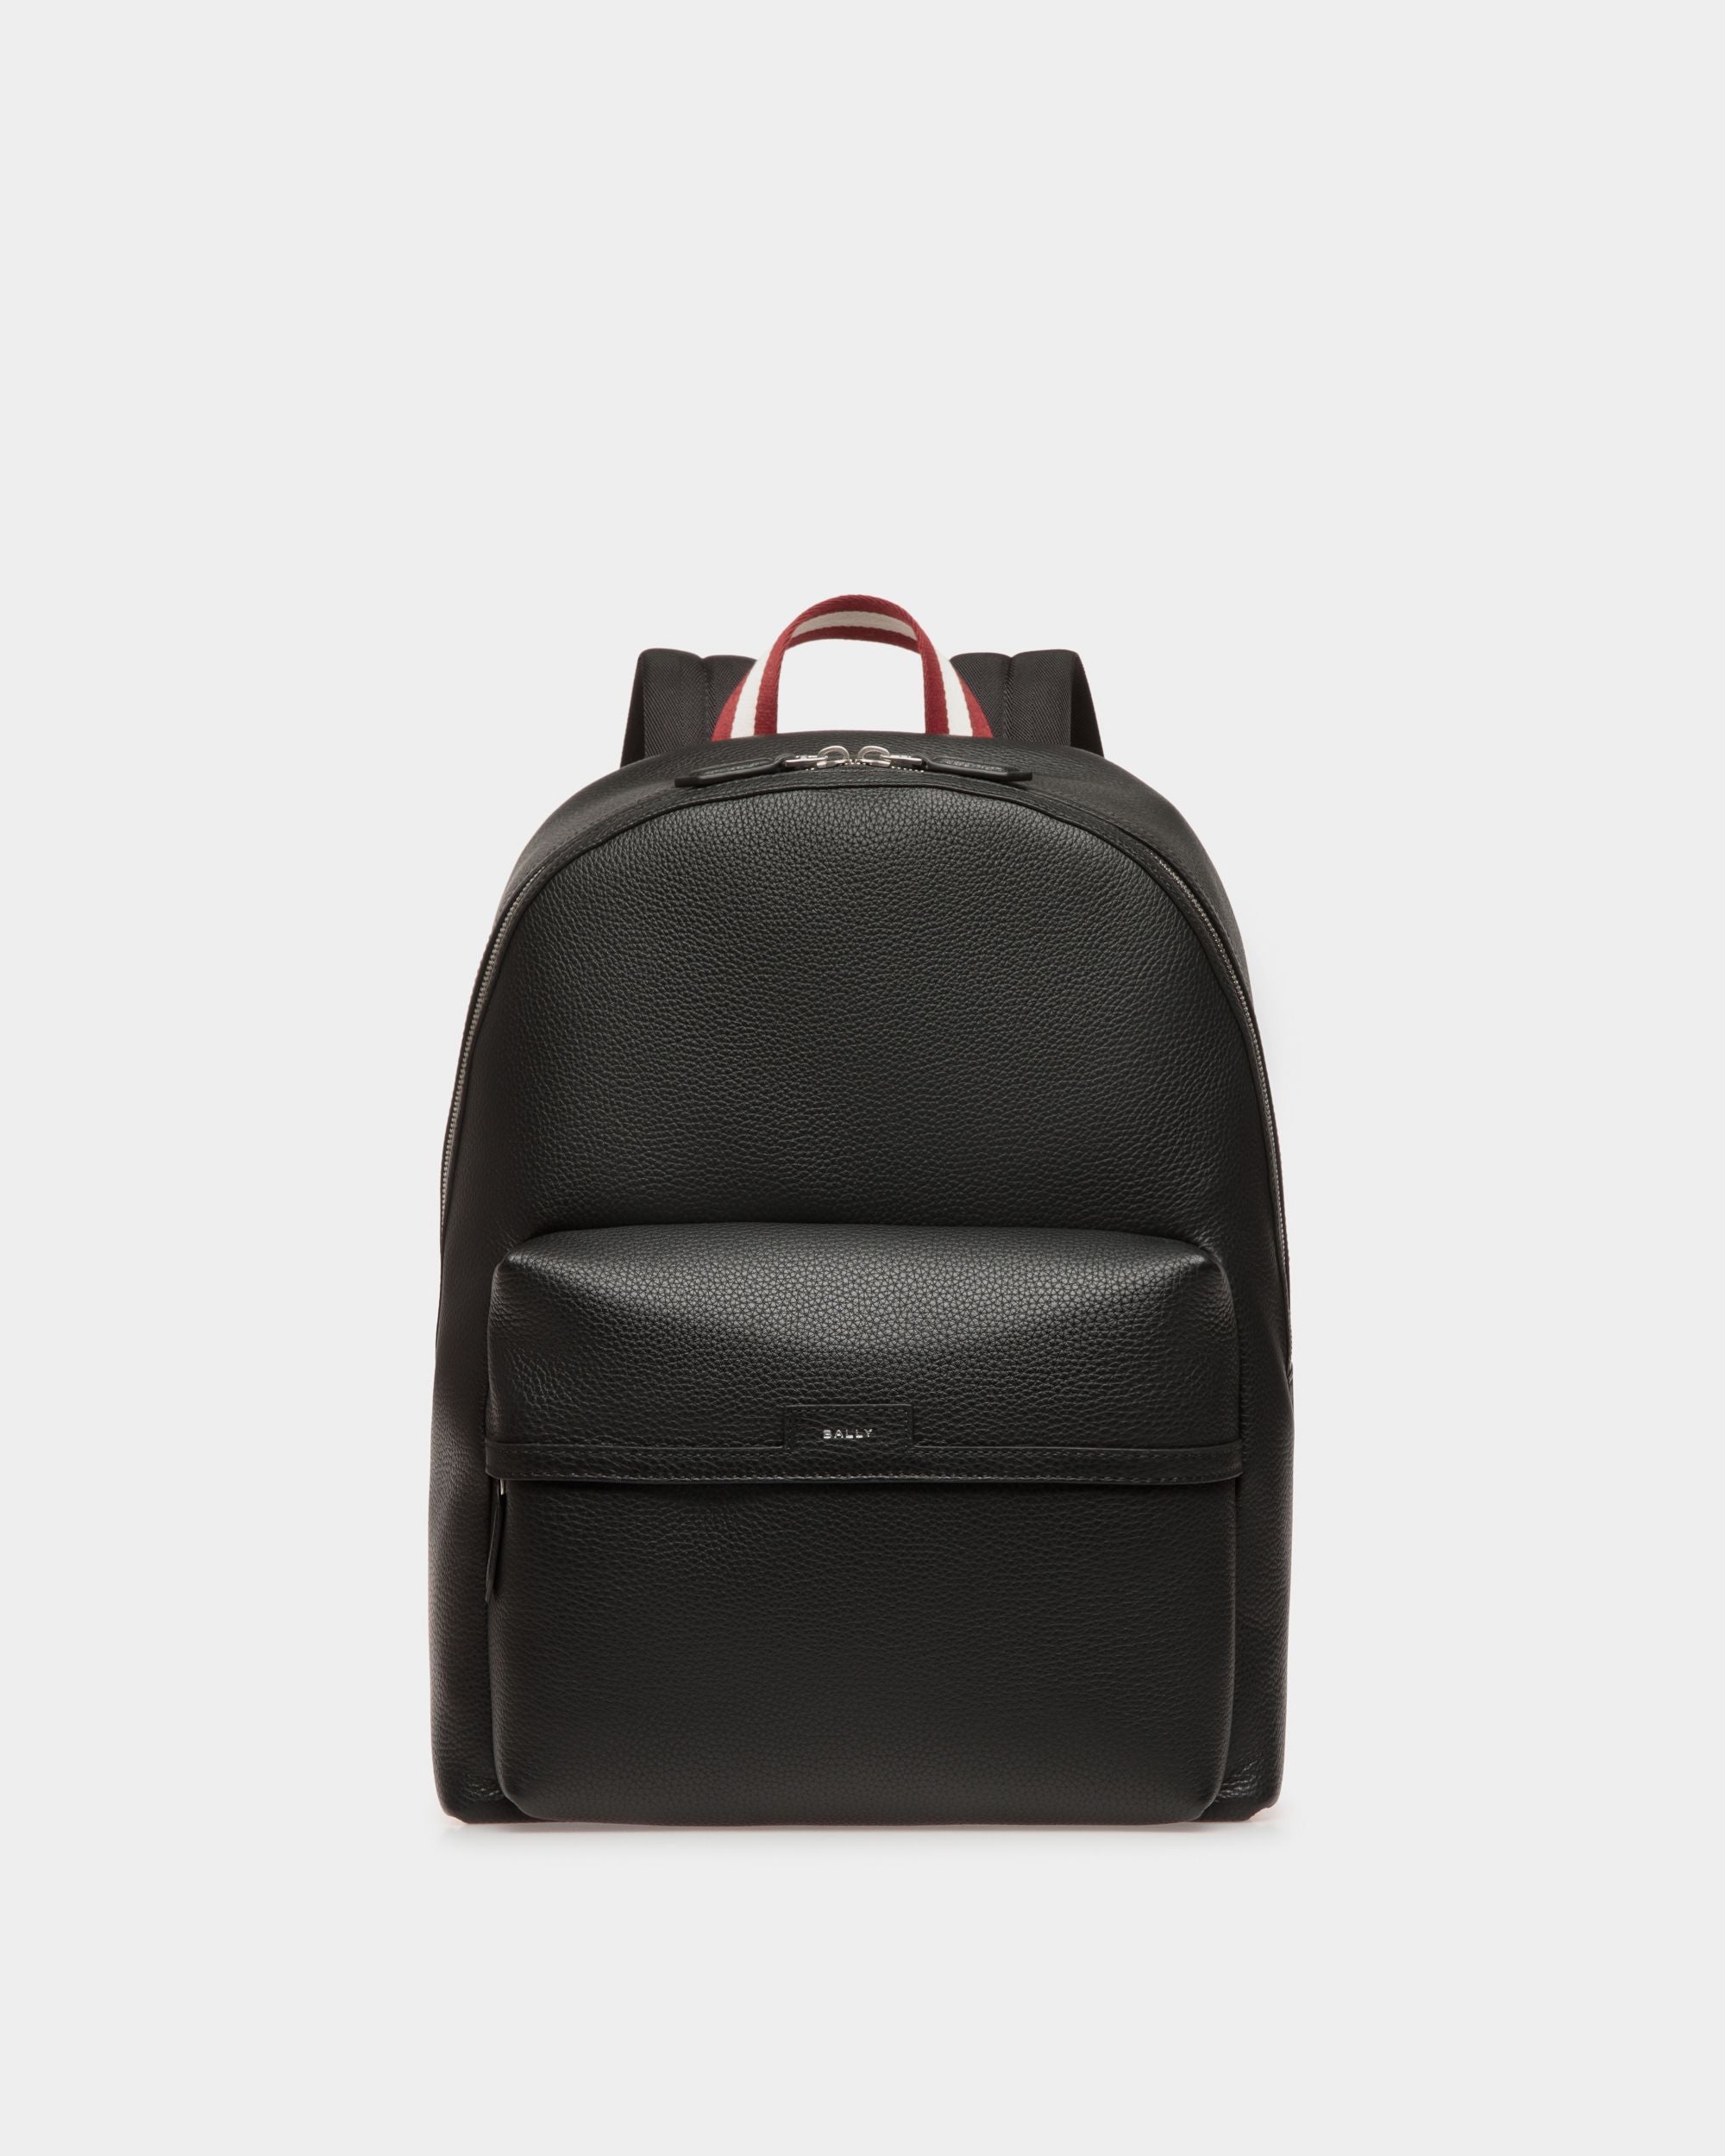 Code | Men's Backpack in Black Grained Leather | Bally | Still Life Front